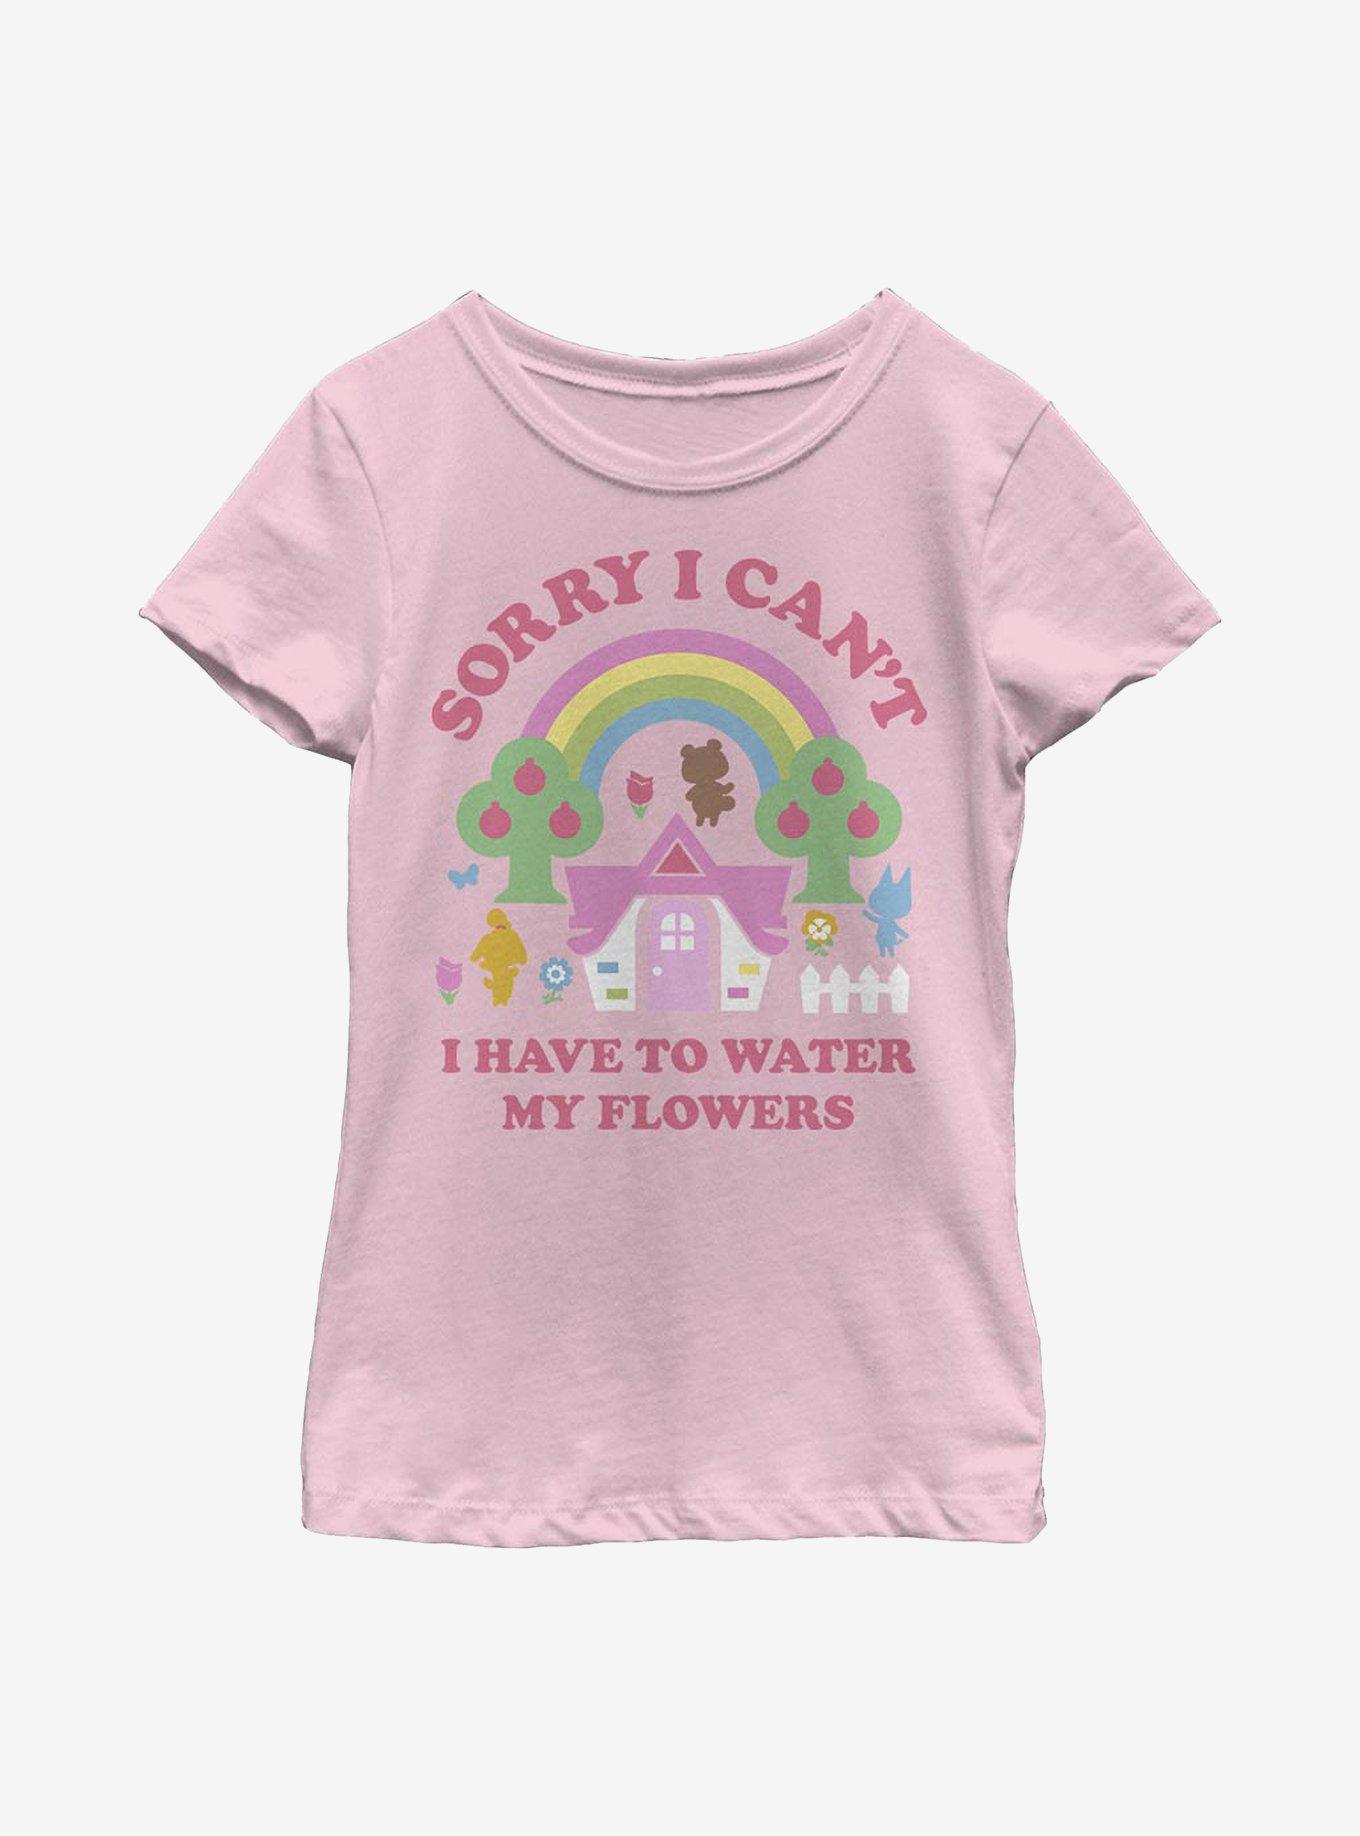 Animal Crossing Have To Water My Flowers Youth Girls T-Shirt, PINK, hi-res